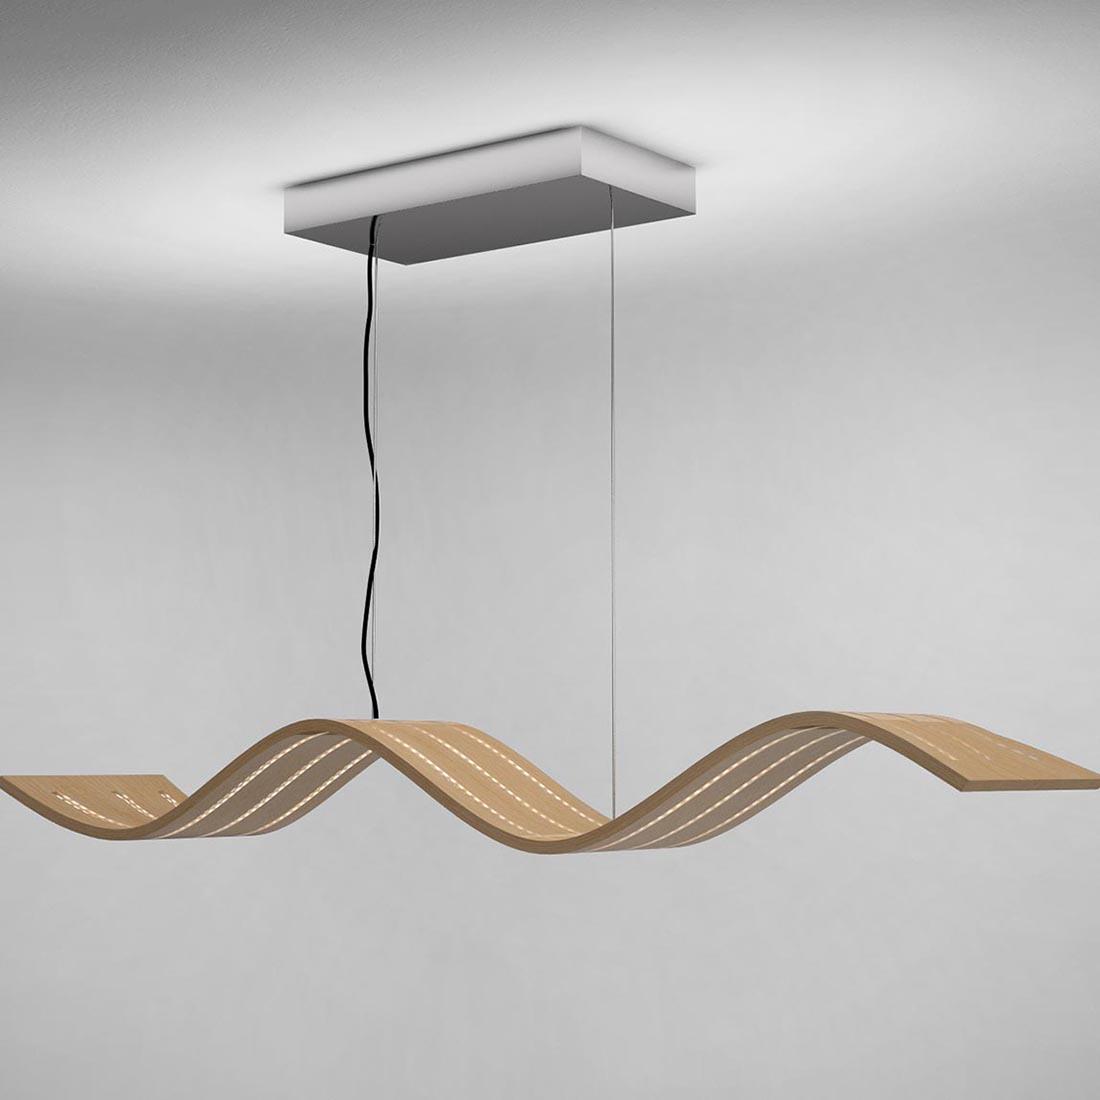 Suspension-lamp-wave-by-wooden-lamp-design